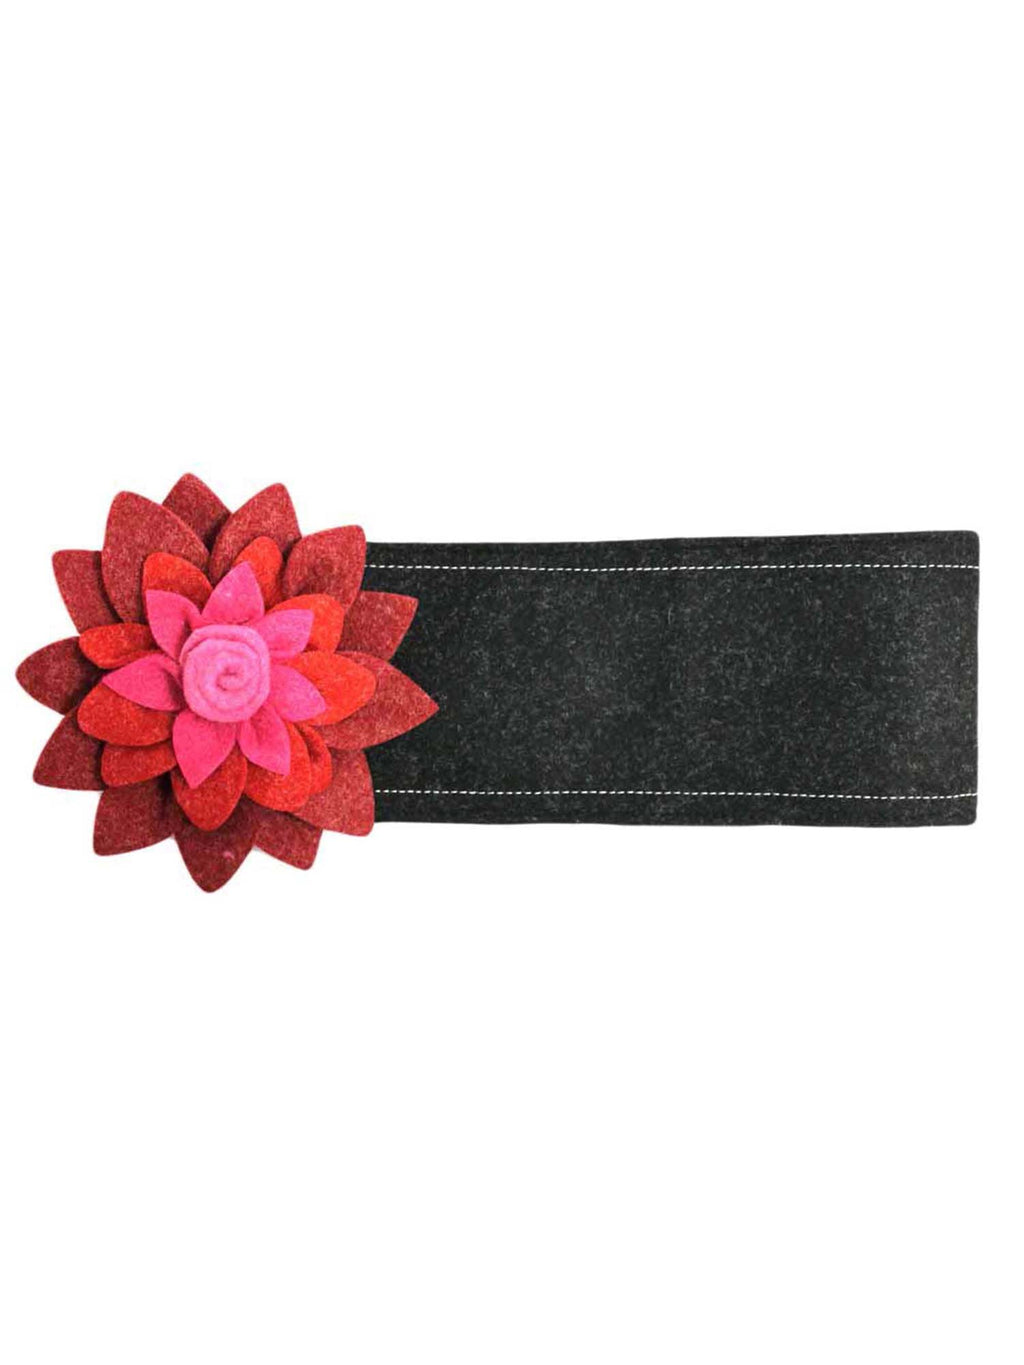 Black Wool Headband With Large Two-Tone Flower